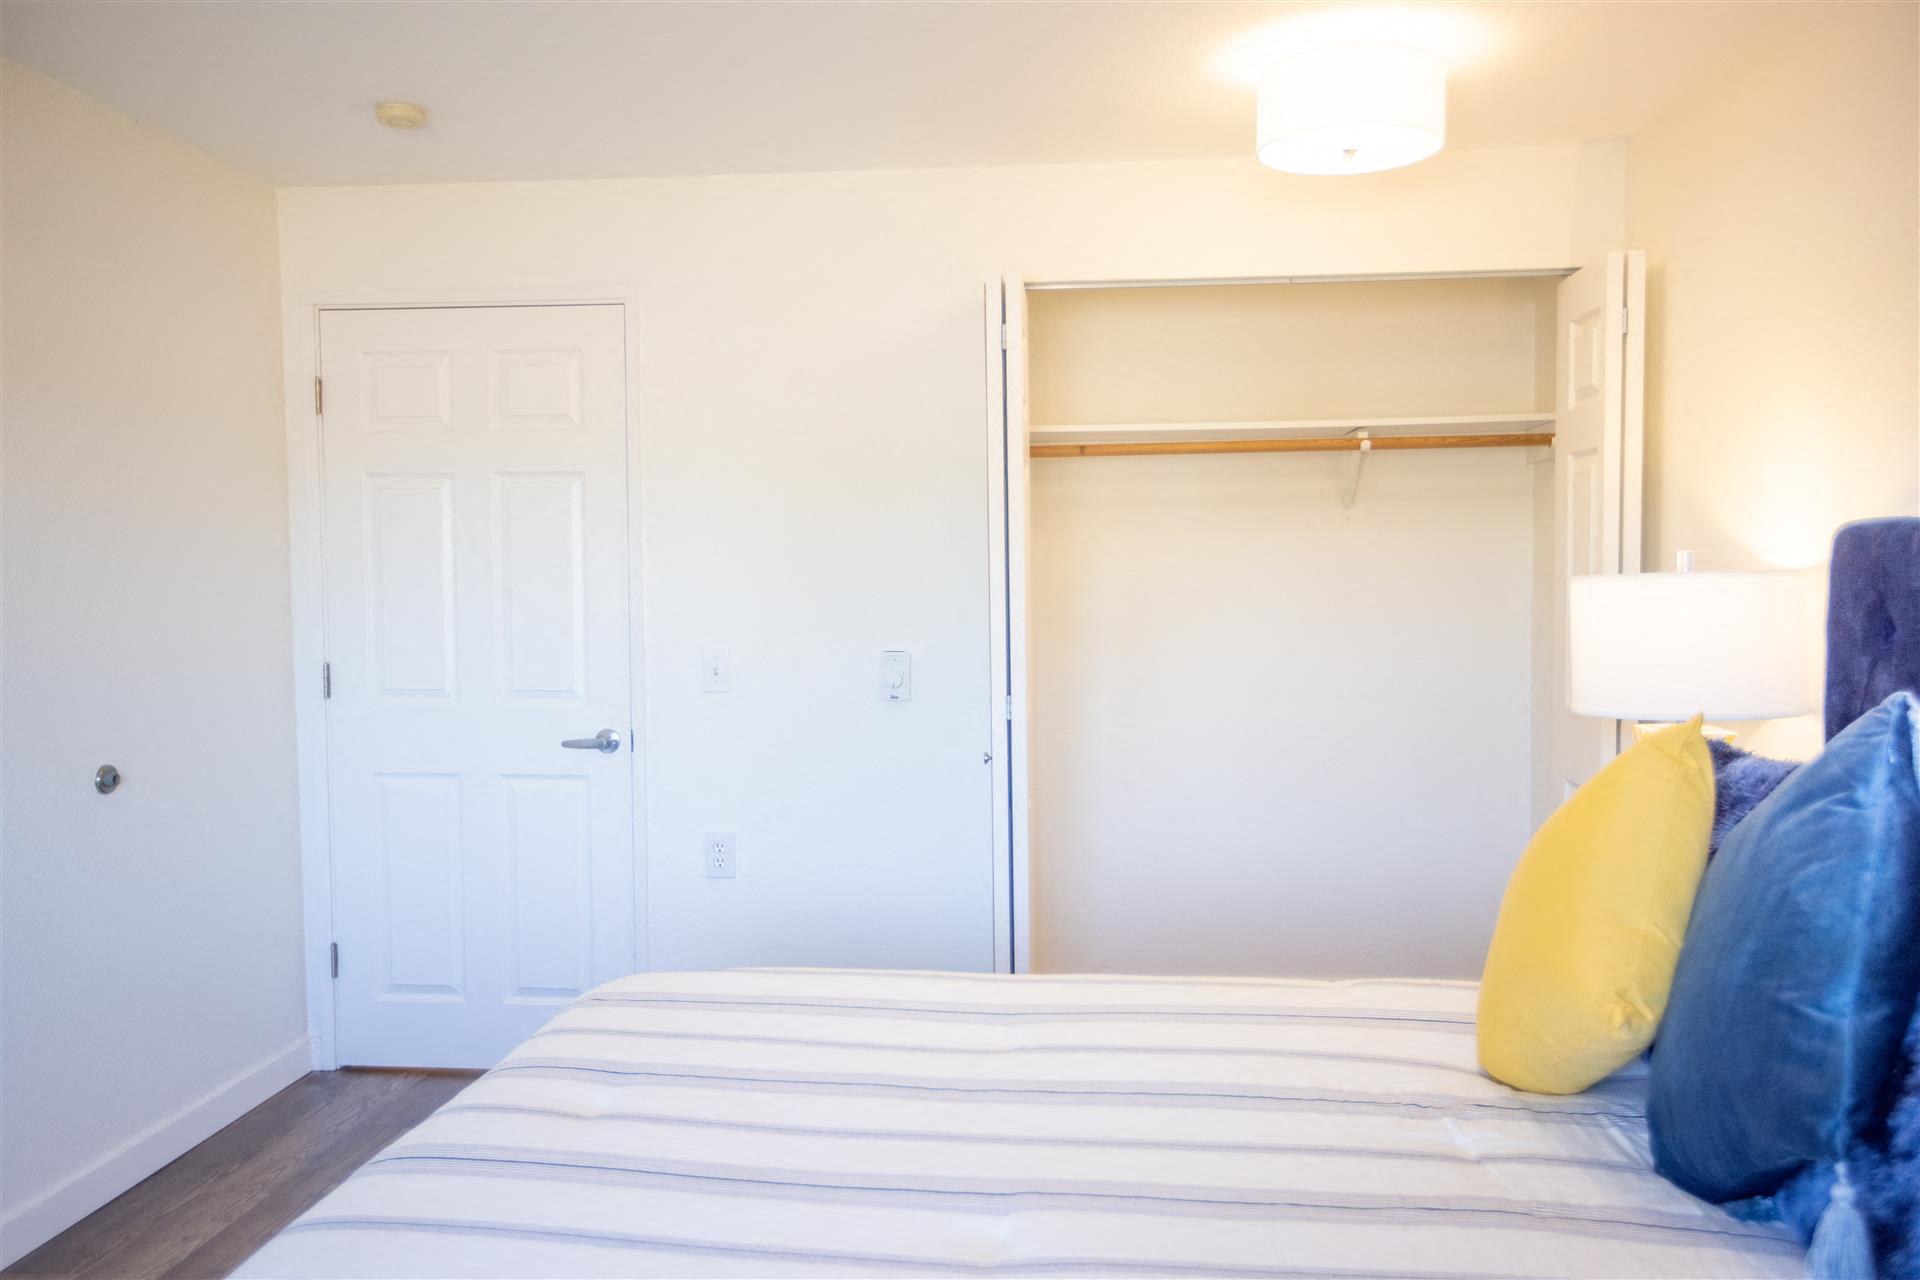 Bedroom with closet at Cogir of Northgate, Seattle, Washington